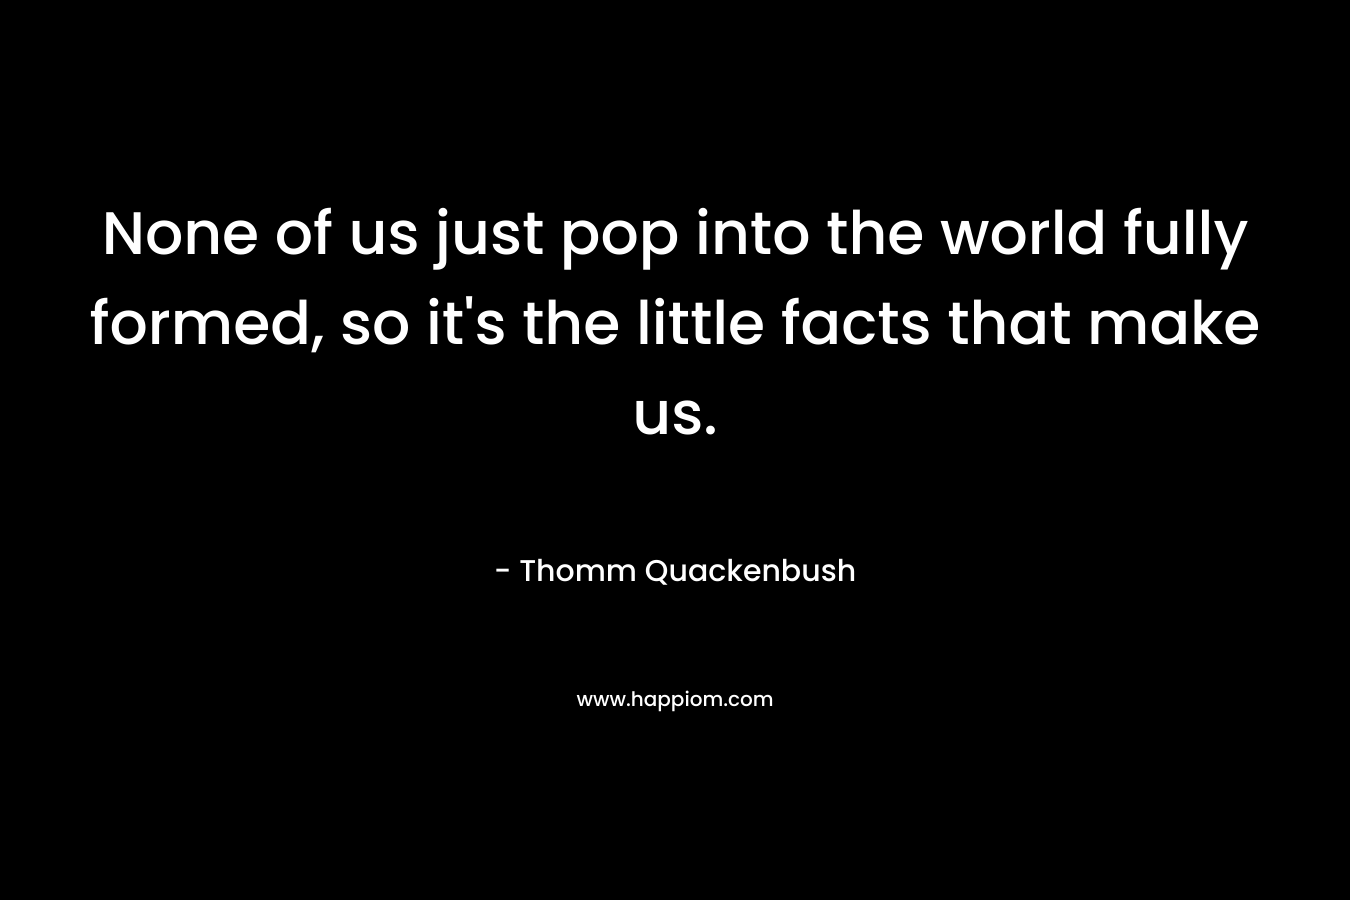 None of us just pop into the world fully formed, so it’s the little facts that make us. – Thomm Quackenbush